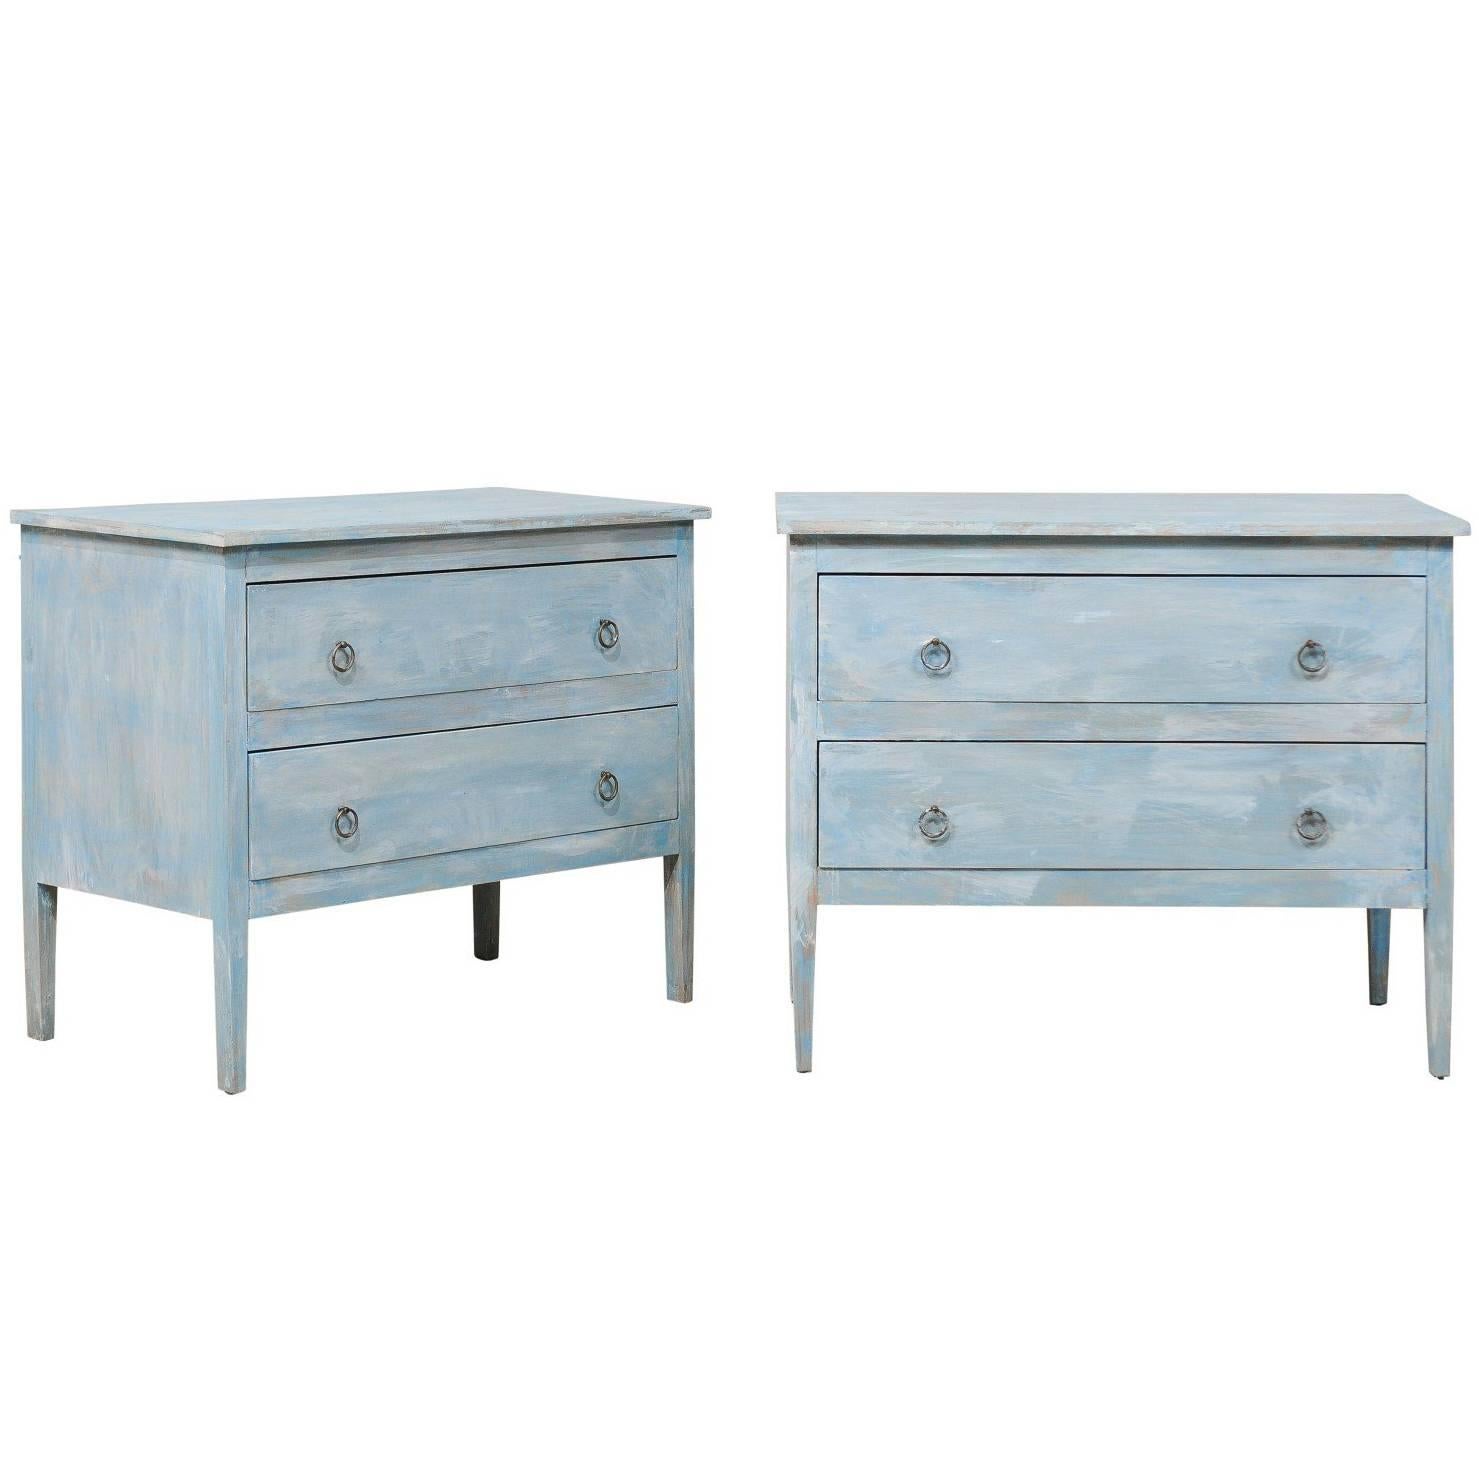 Pair of Painted Wood Two-Drawer Chests in Grey, Light Blue and White Color